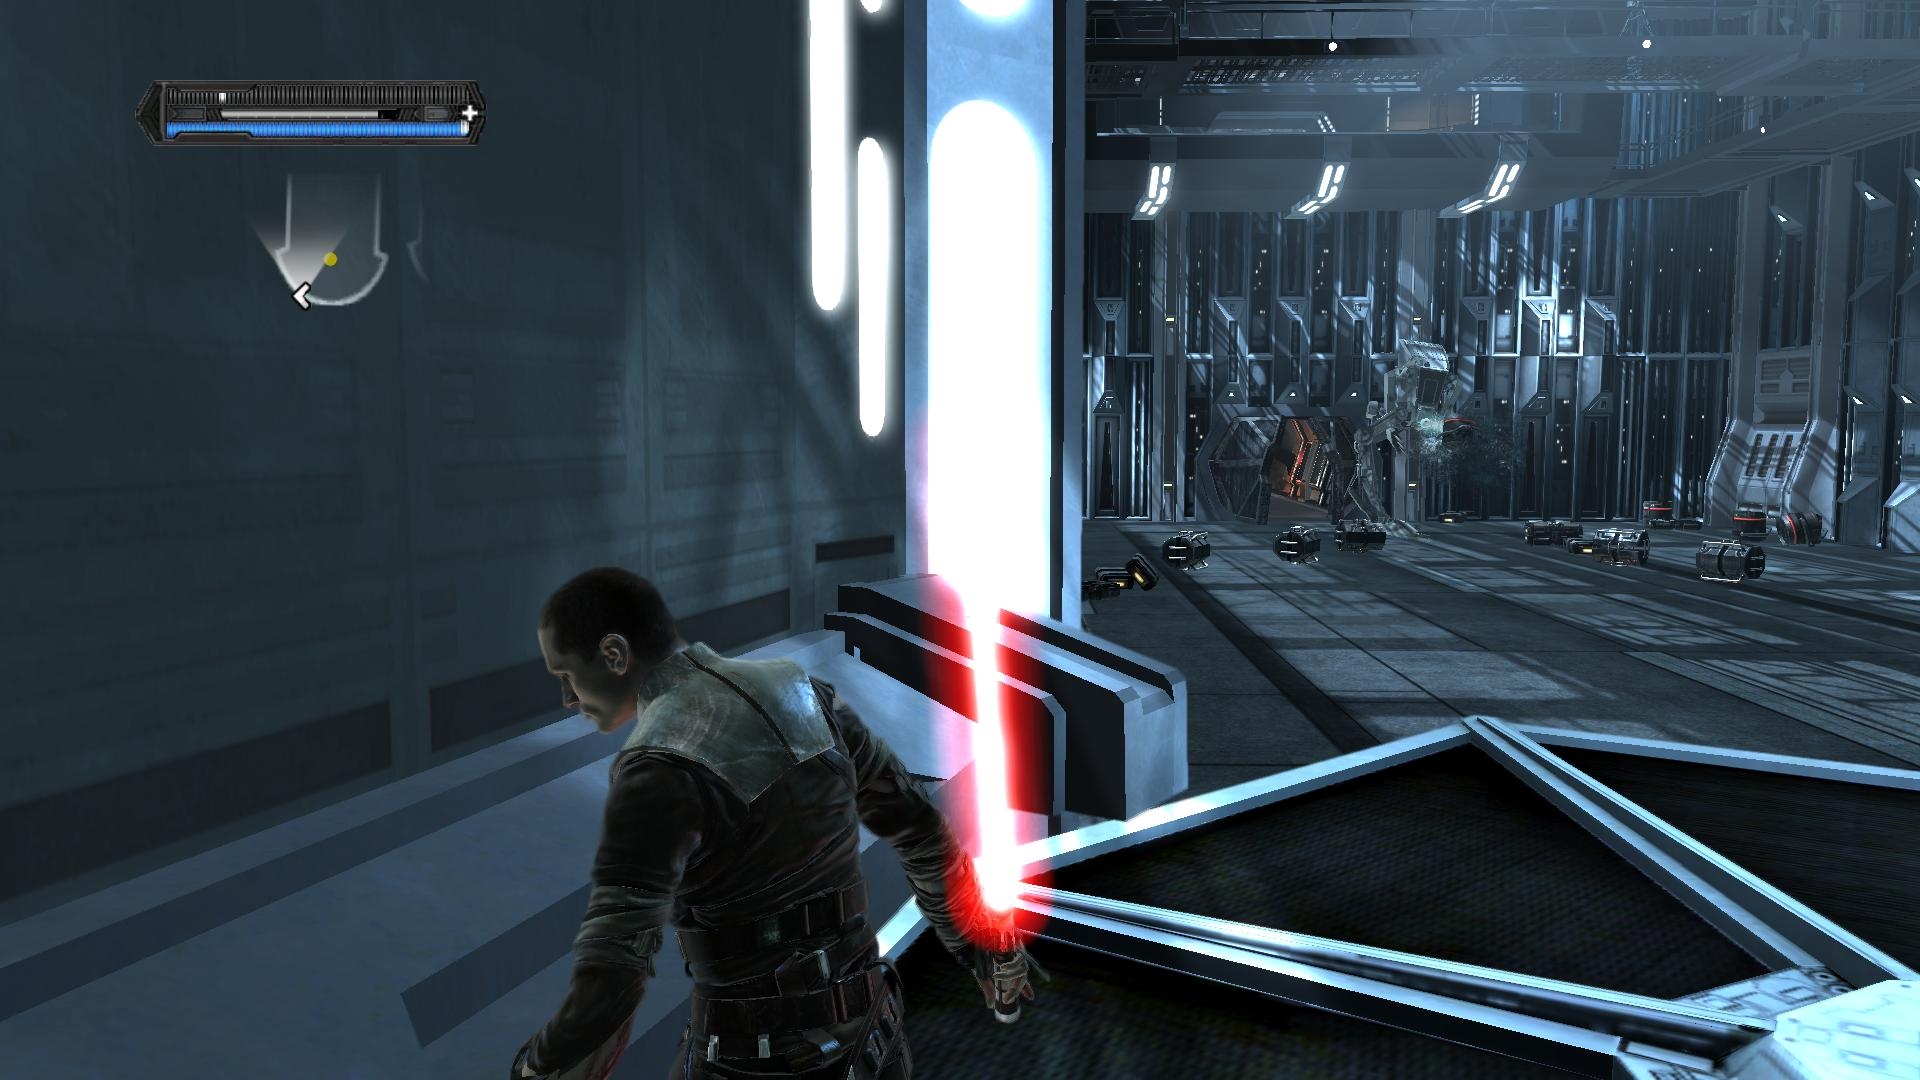 Игра star wars the force unleashed. Star Wars: the Force unleashed - Ultimate Sith Edition. Star Wars unleashed Ultimate Sith Edition. Star Wars the Force unleashed Sith. Force unleashed Sith Edition.